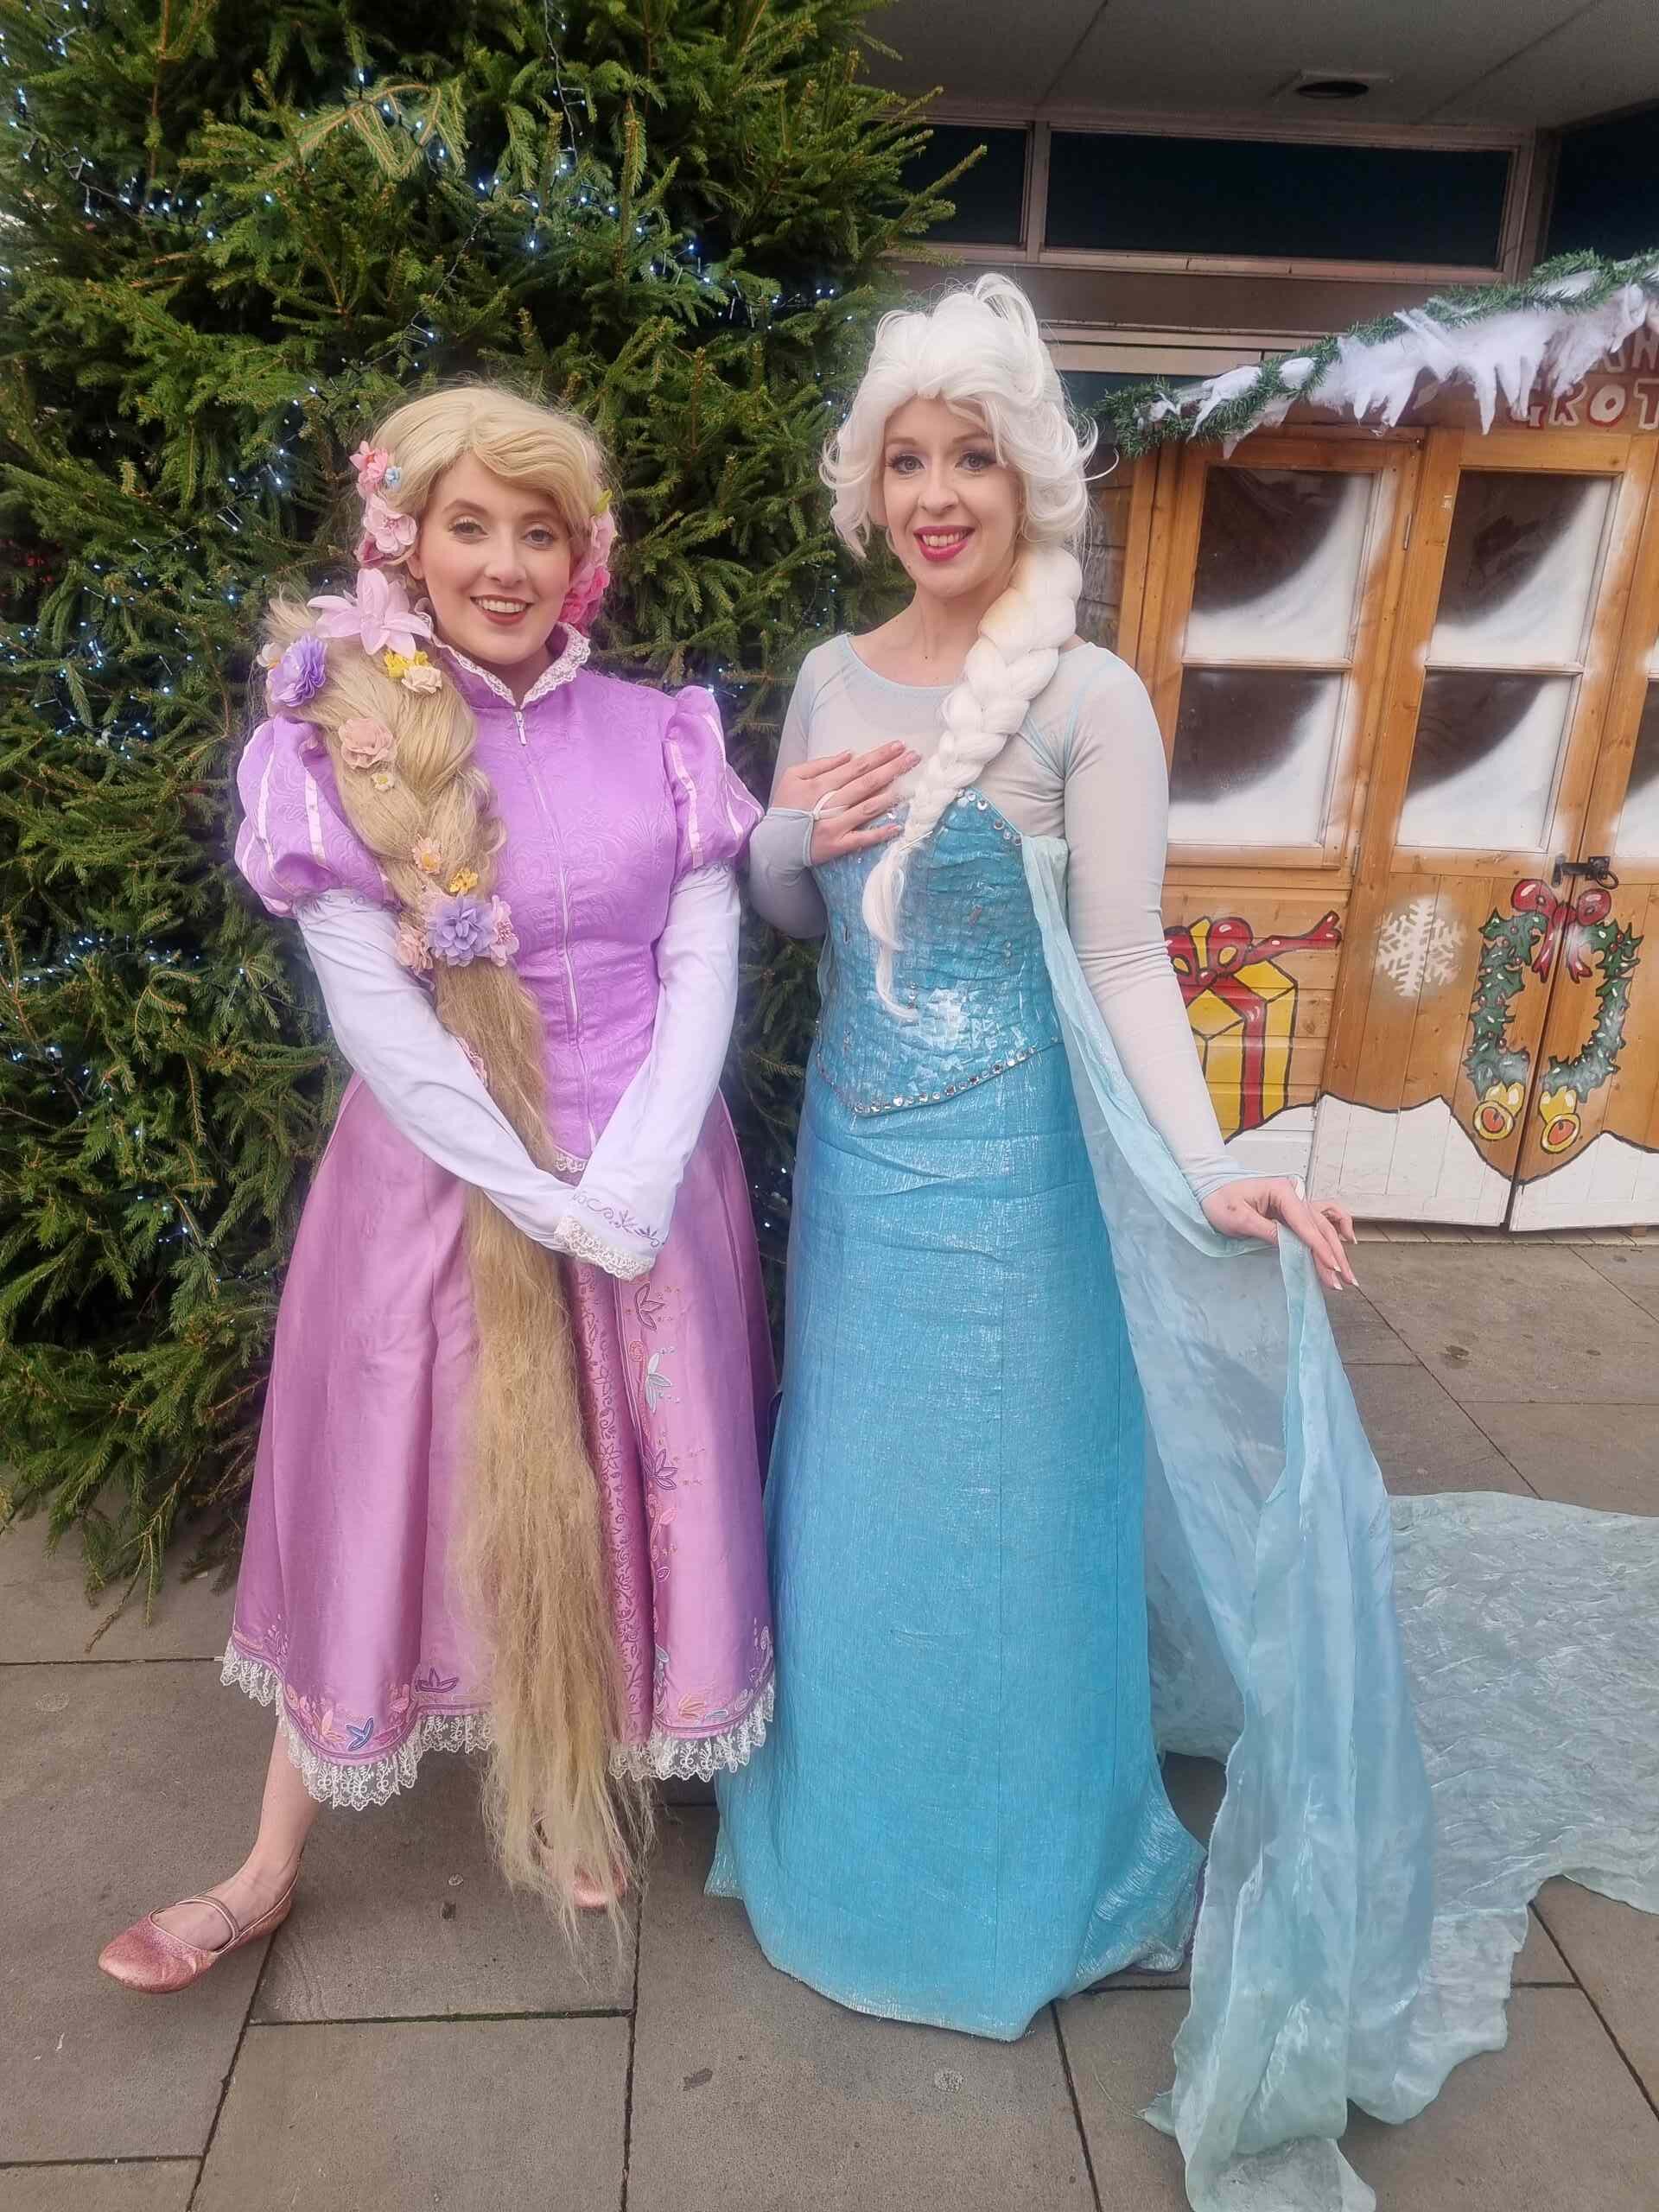 Two princesses pose in front of a Christmas tree and a wooden elf workshop shed. The first princesses has on a floor length pink dress with capped sleeves and long braided hair down to her feet with flowers embedded in her hair. The second Ice princess has a floor length light blue dress that glitters, with white sleeves and a sheer cape that fans out on the floor behind her.